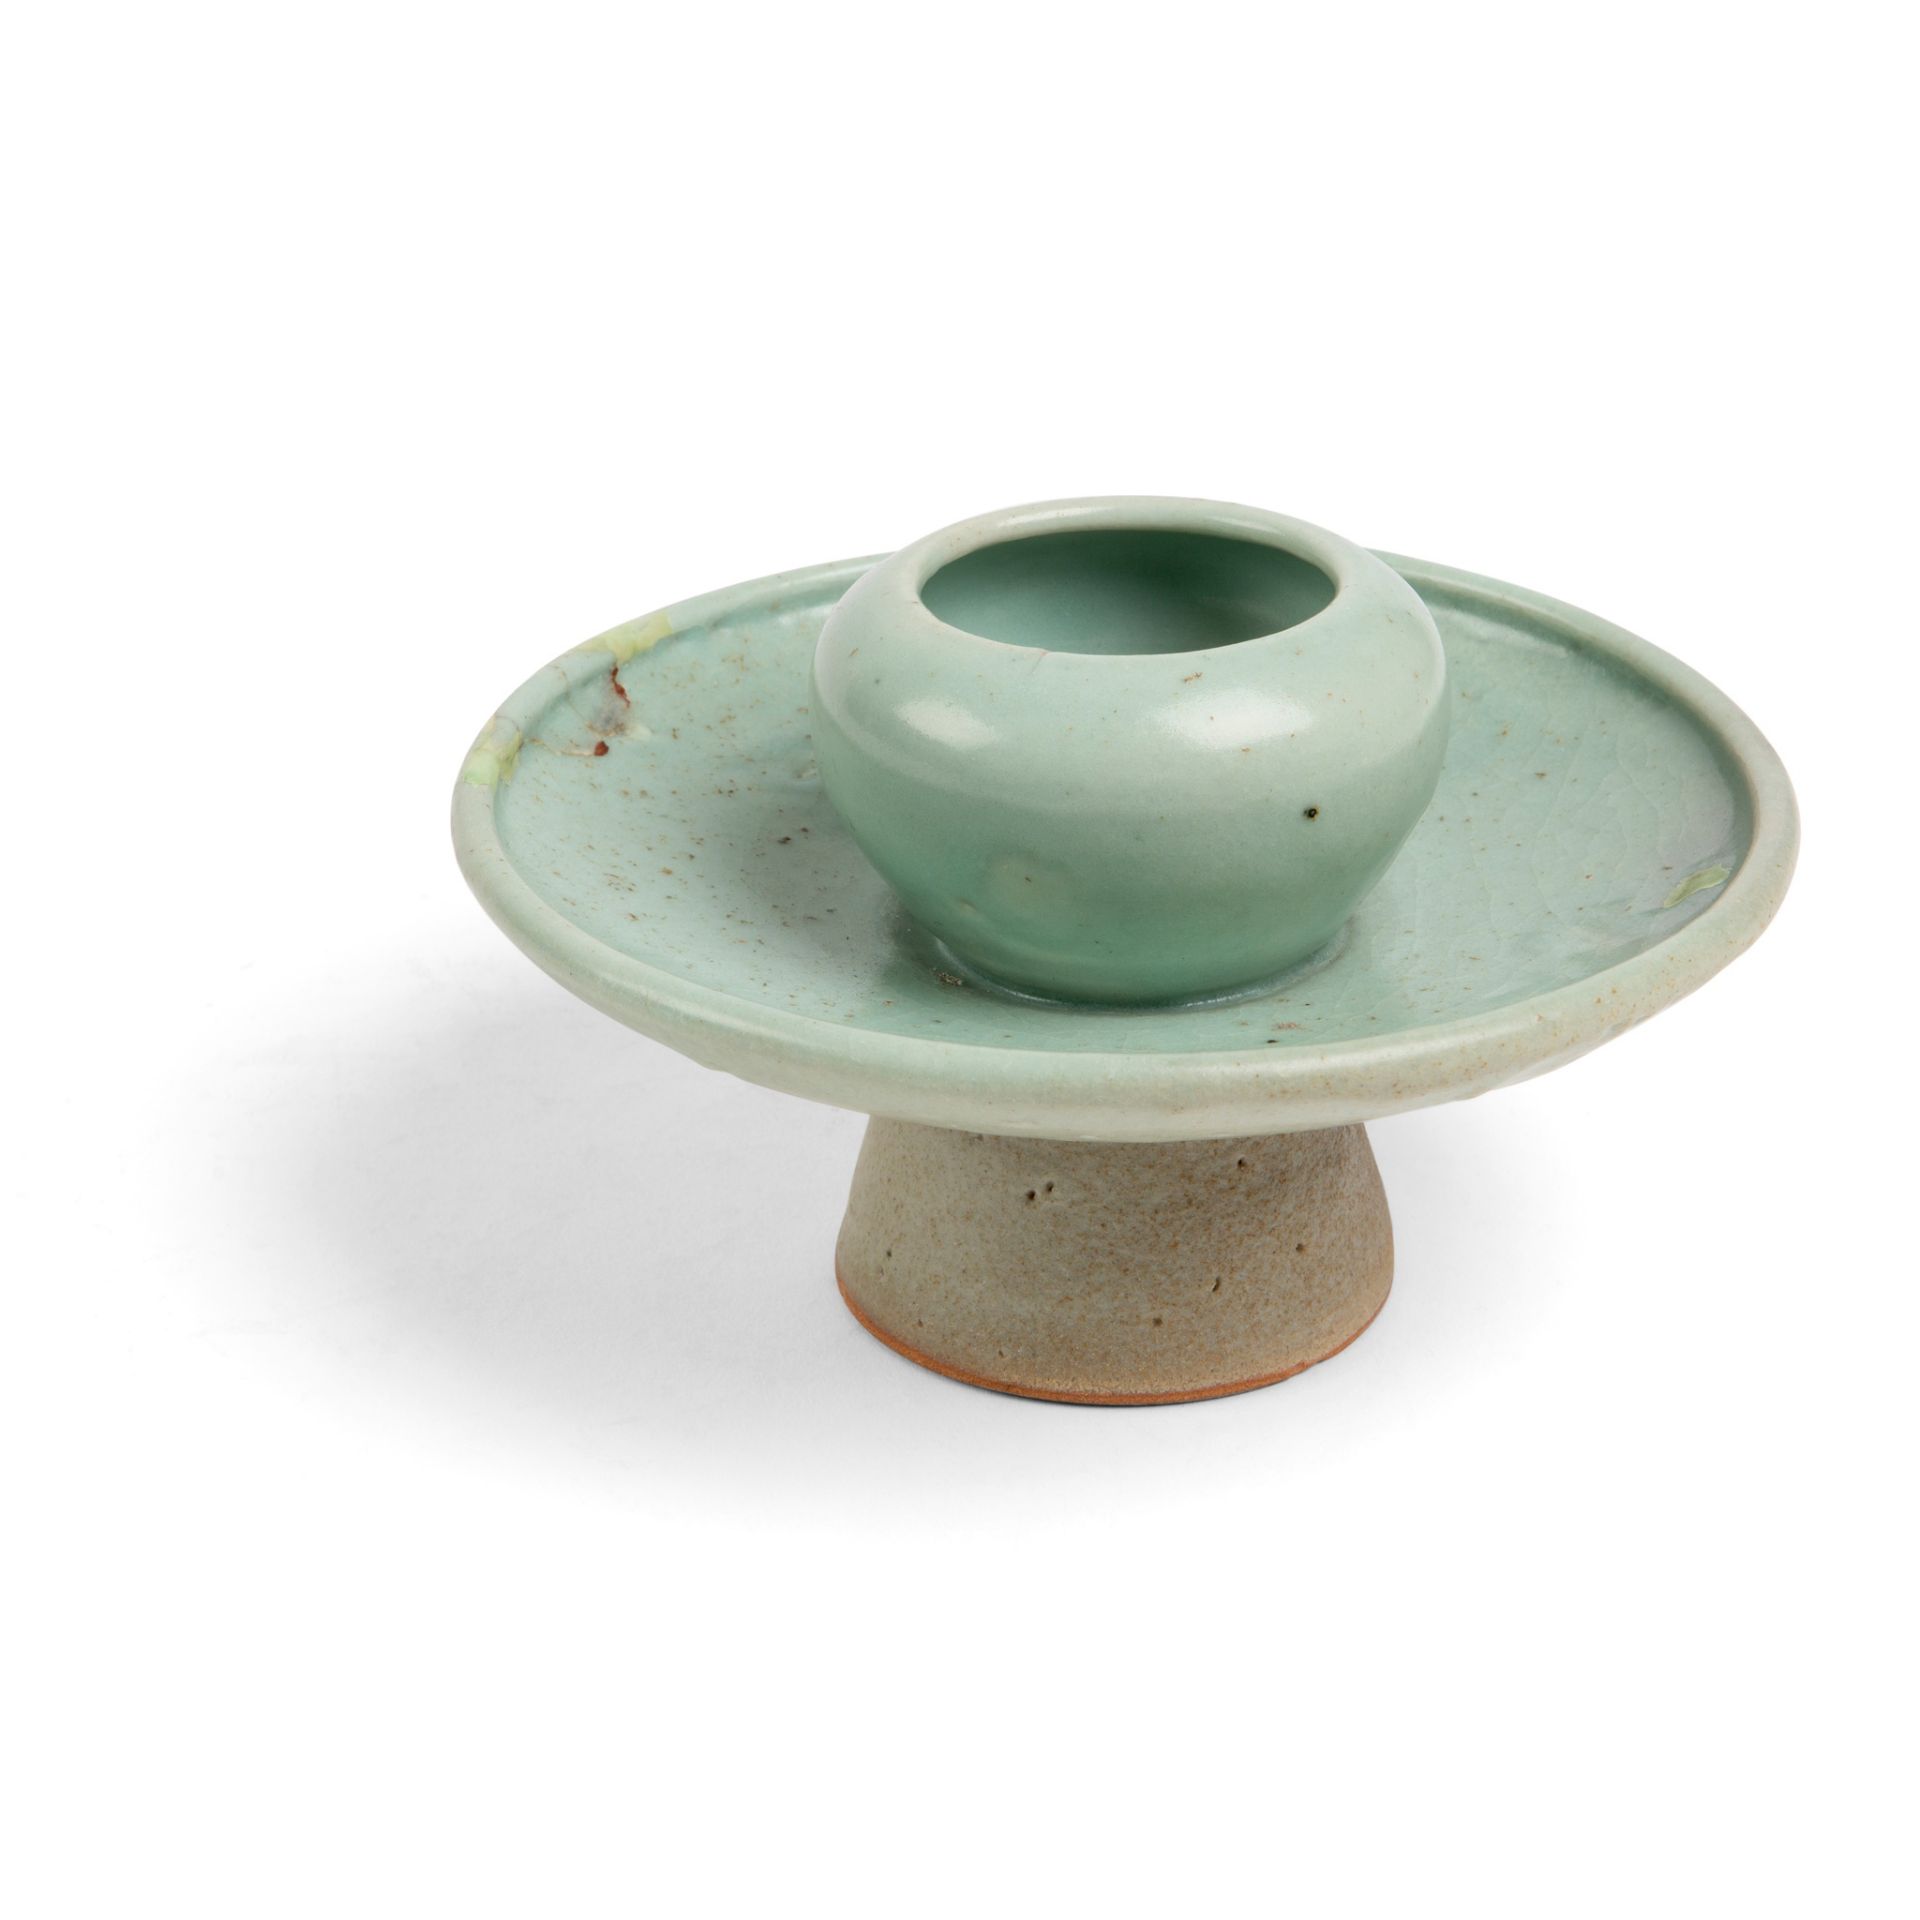 KOREAN CELADON CUP STAND GORYEO DYNASTY, 13TH CENTURY